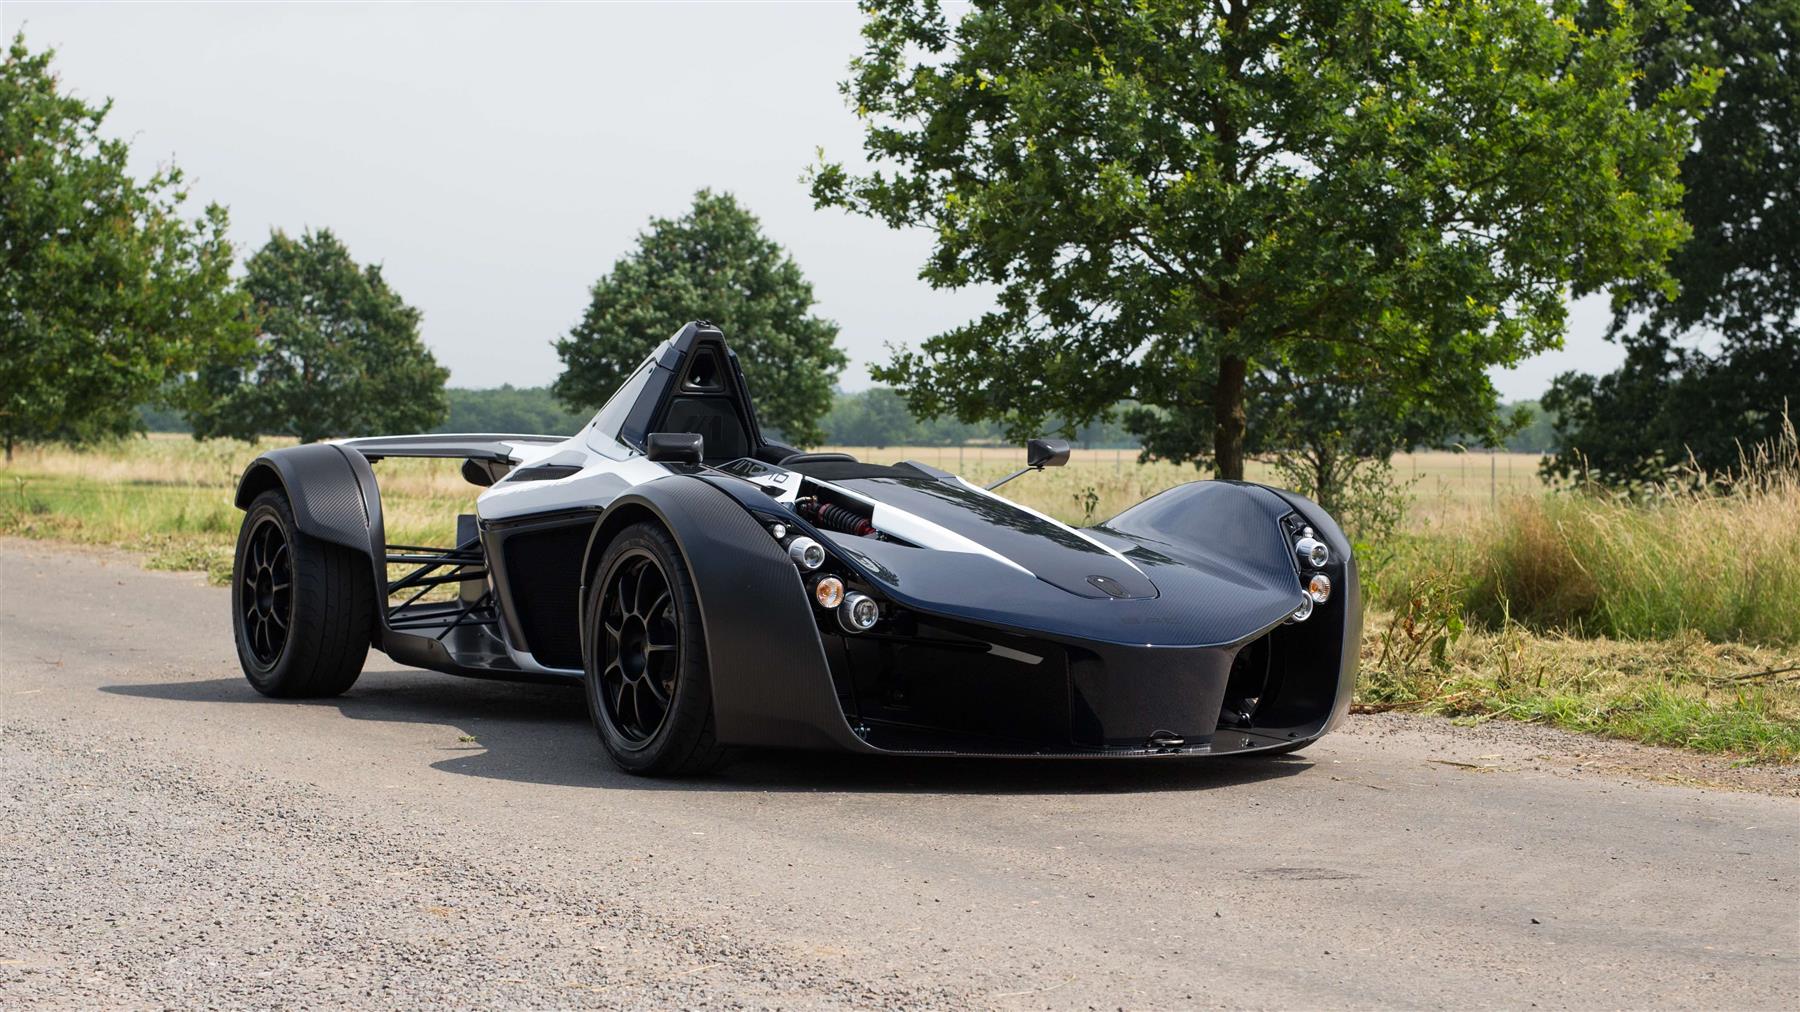 Amazing BAC Mono Pictures & Backgrounds